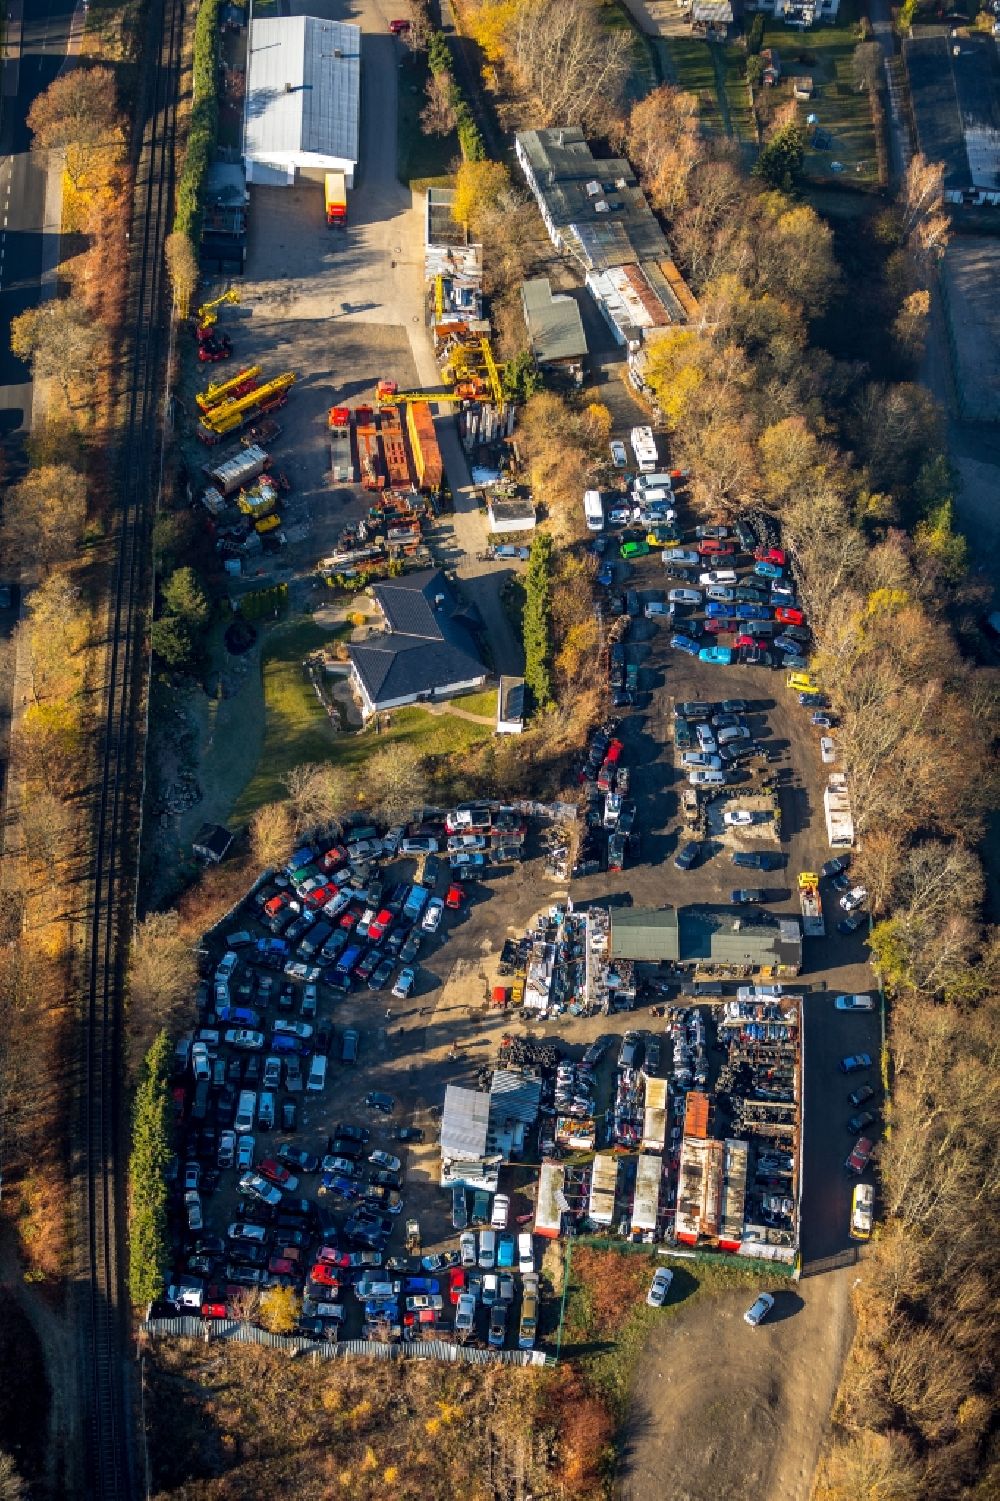 Lüdenscheid from above - Scrapyard for recycling of cars cars and used vehicles with decomposition and aftermarket of AVL - Autoverwertung Luedenscheid GmbH on Dammstrasse in Luedenscheid in the state North Rhine-Westphalia, Germany